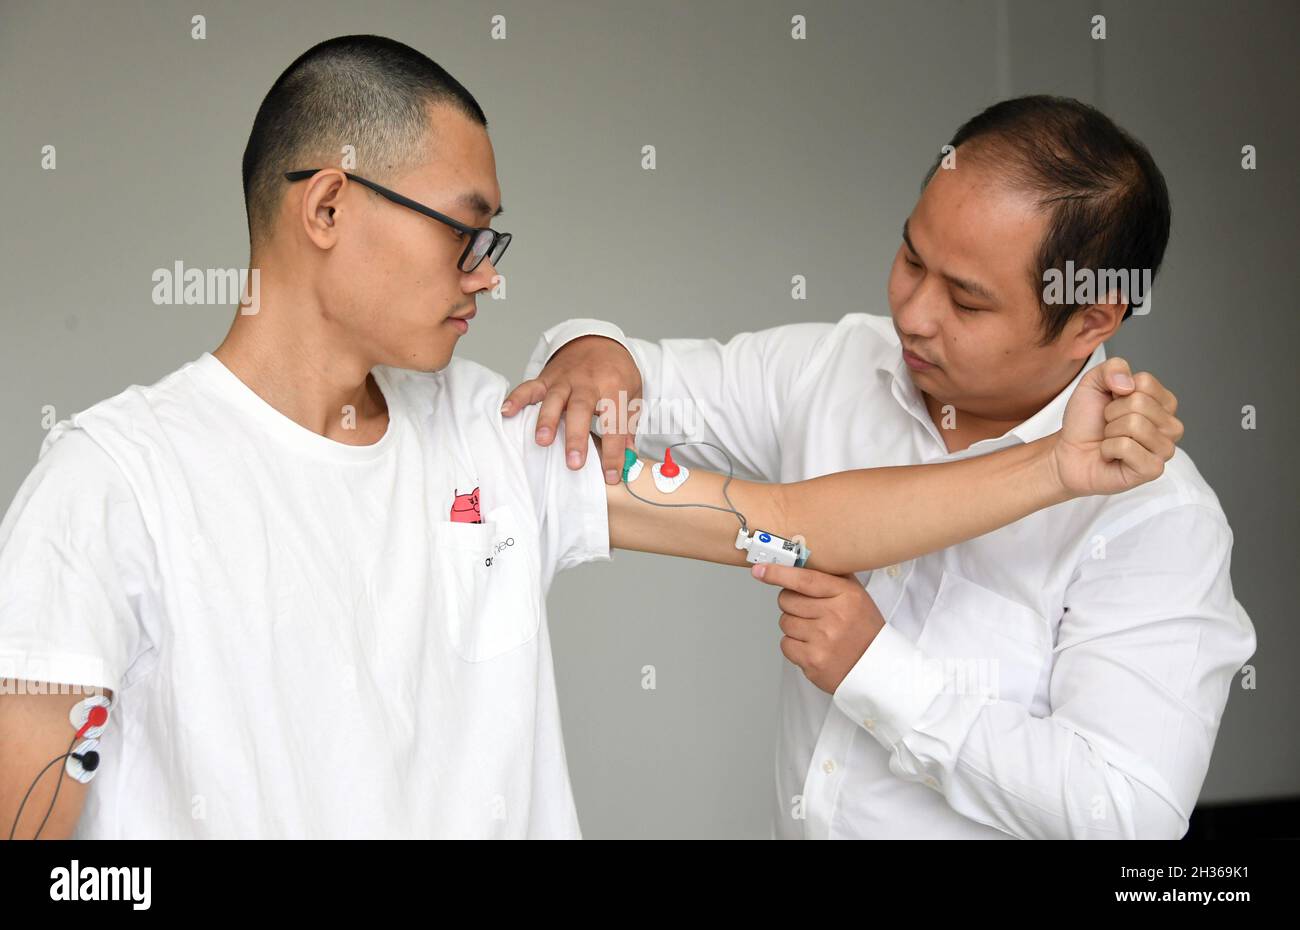 Beijing, China. 14th Oct, 2021. Sun Qing (R), a student of Professor Huo Bo, puts on sensors on Huang Yi, also a student of Professor Huo, at the School of Astronautics, Beijing Institute of Technology, in Beijing, capital of China, Oct. 14, 2021. TO GO WITH 'China Focus: Smart tech serves as coaches for Beijing 2022 athletes' Credit: Ren Chao/Xinhua/Alamy Live News Stock Photo